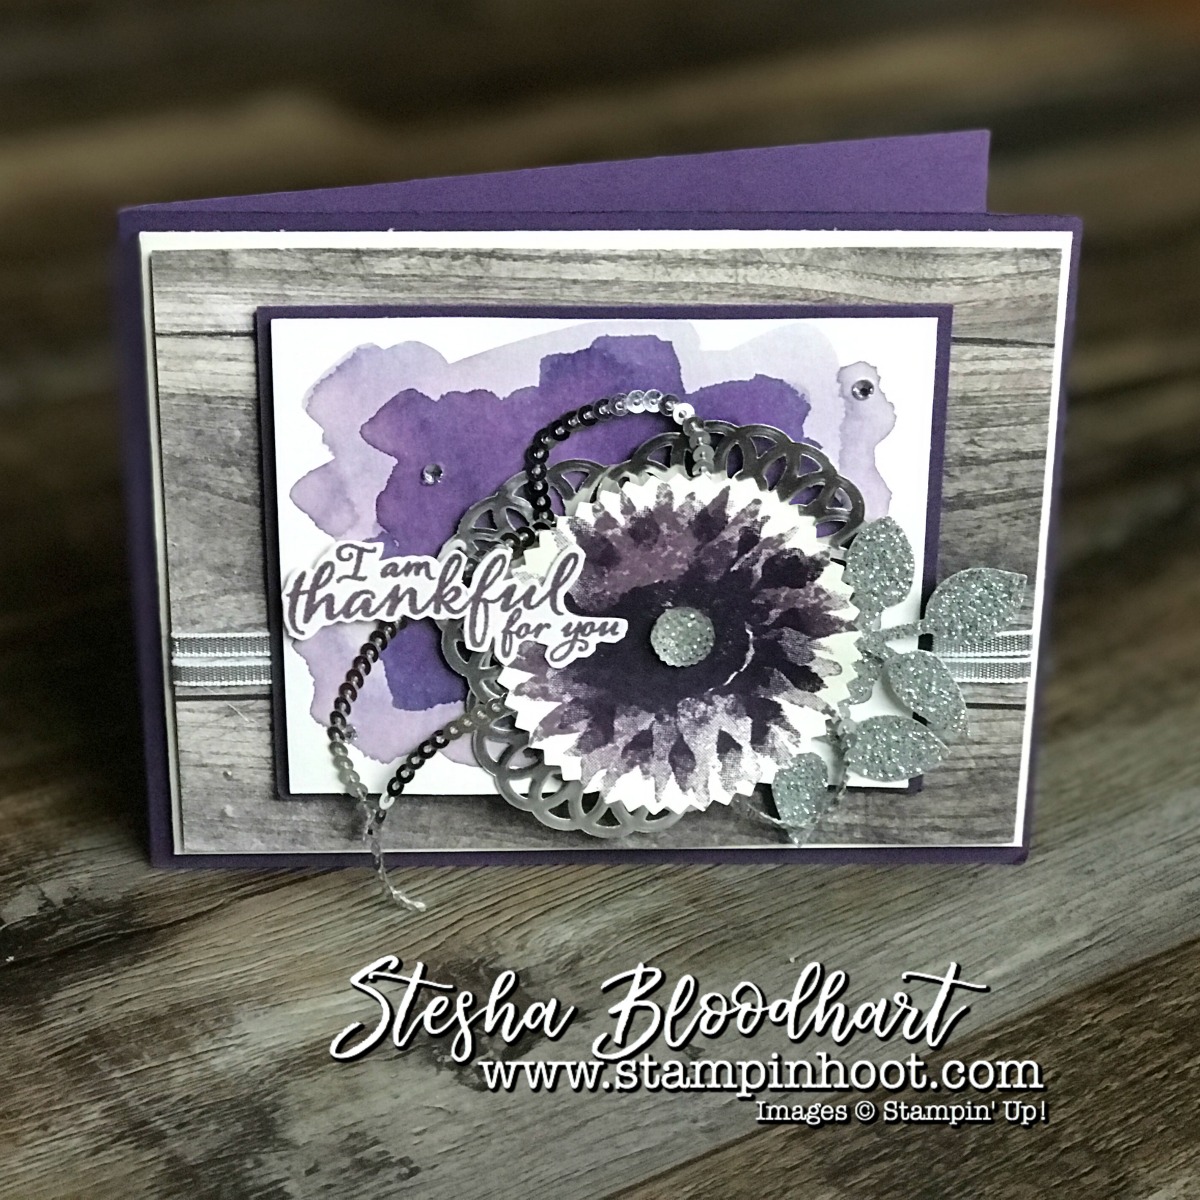 Painted Harvest Bundle by Stampin' Up! Takes a Spin with Elegant Eggplant and Sparkly Silver. Details at Stampin' Hoot! Stesha Bloodhart #paintedharvest #eleganteggplant